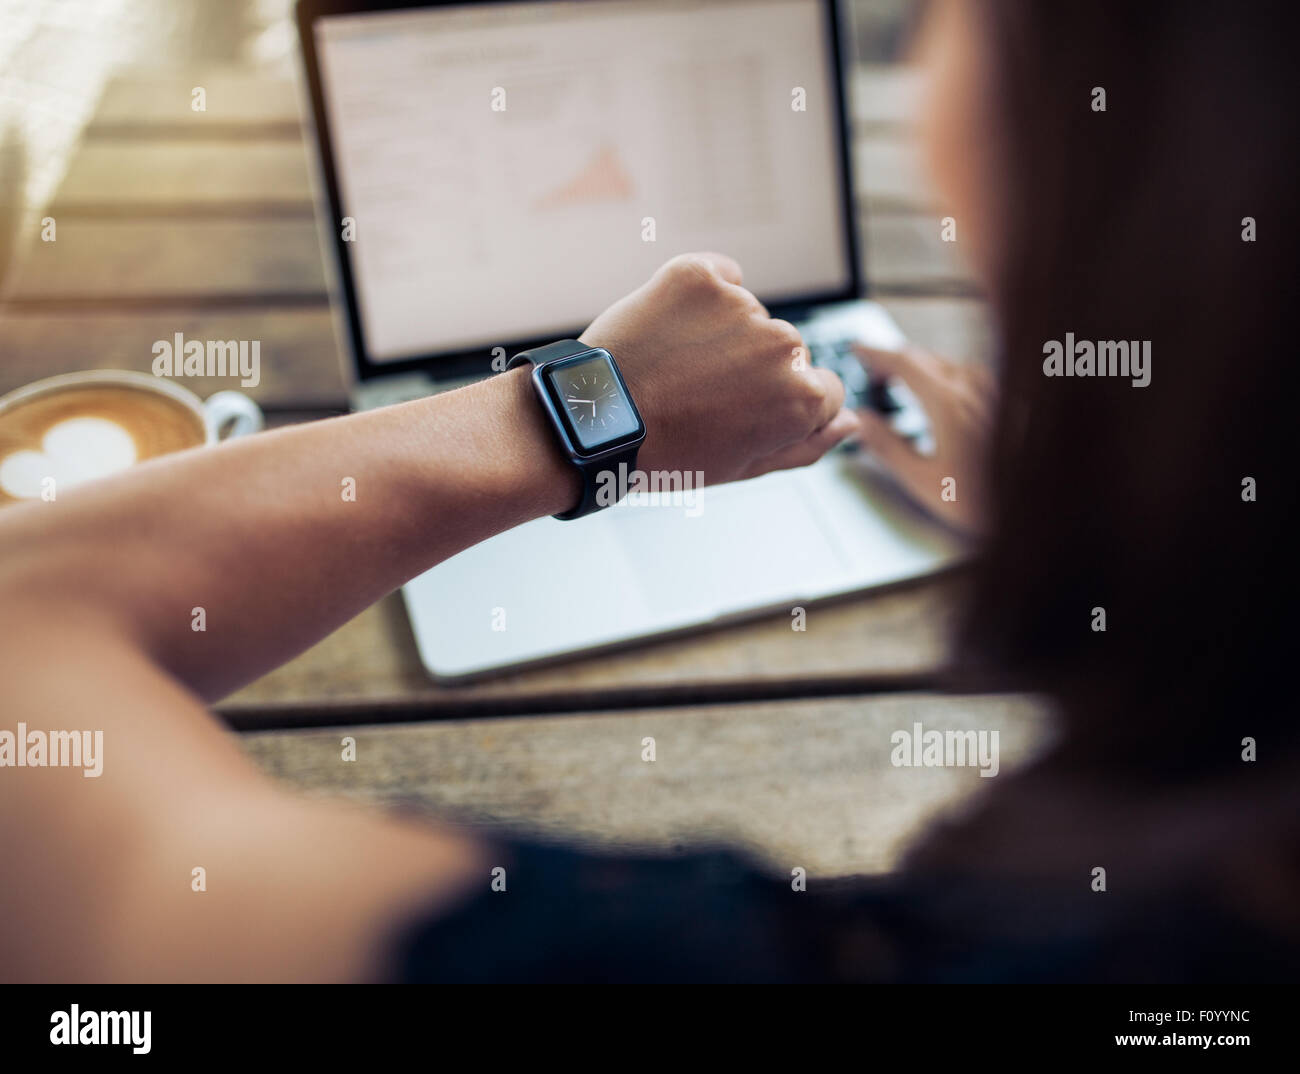 Close up shot of a woman checking time on her smartwatch. Female sitting in cafe with a laptop and cup of coffee. Stock Photo